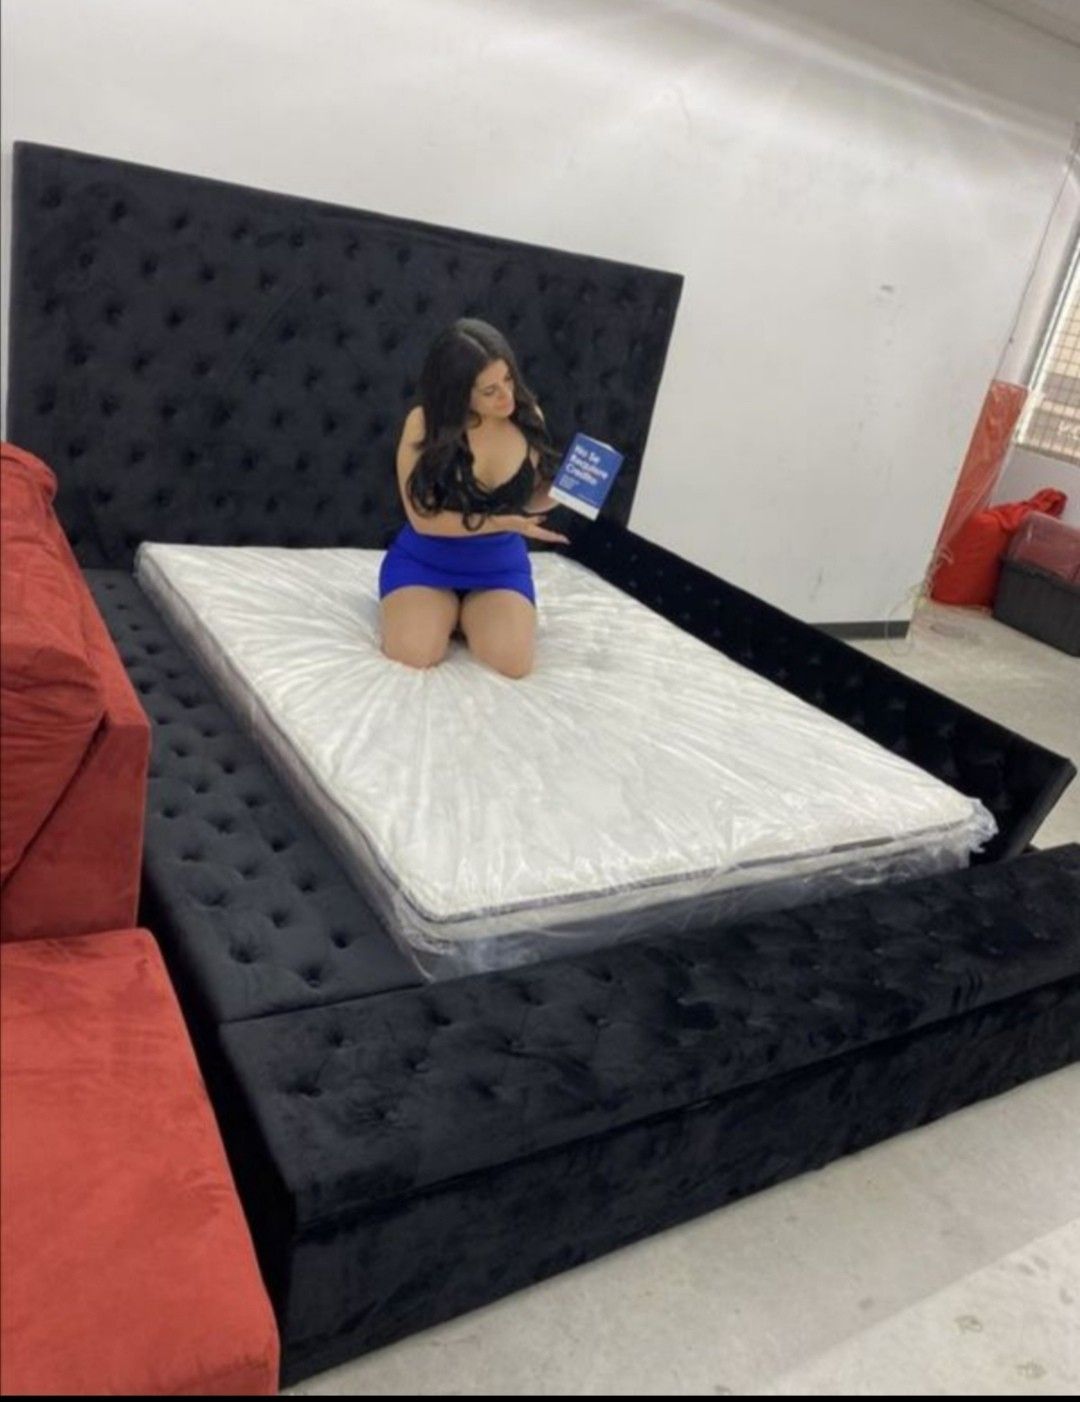 Brand new 🌴🌴 Wonderful!! 👌Velvet black queen size bed with mattress 👑$39 down 🚚 No credit check